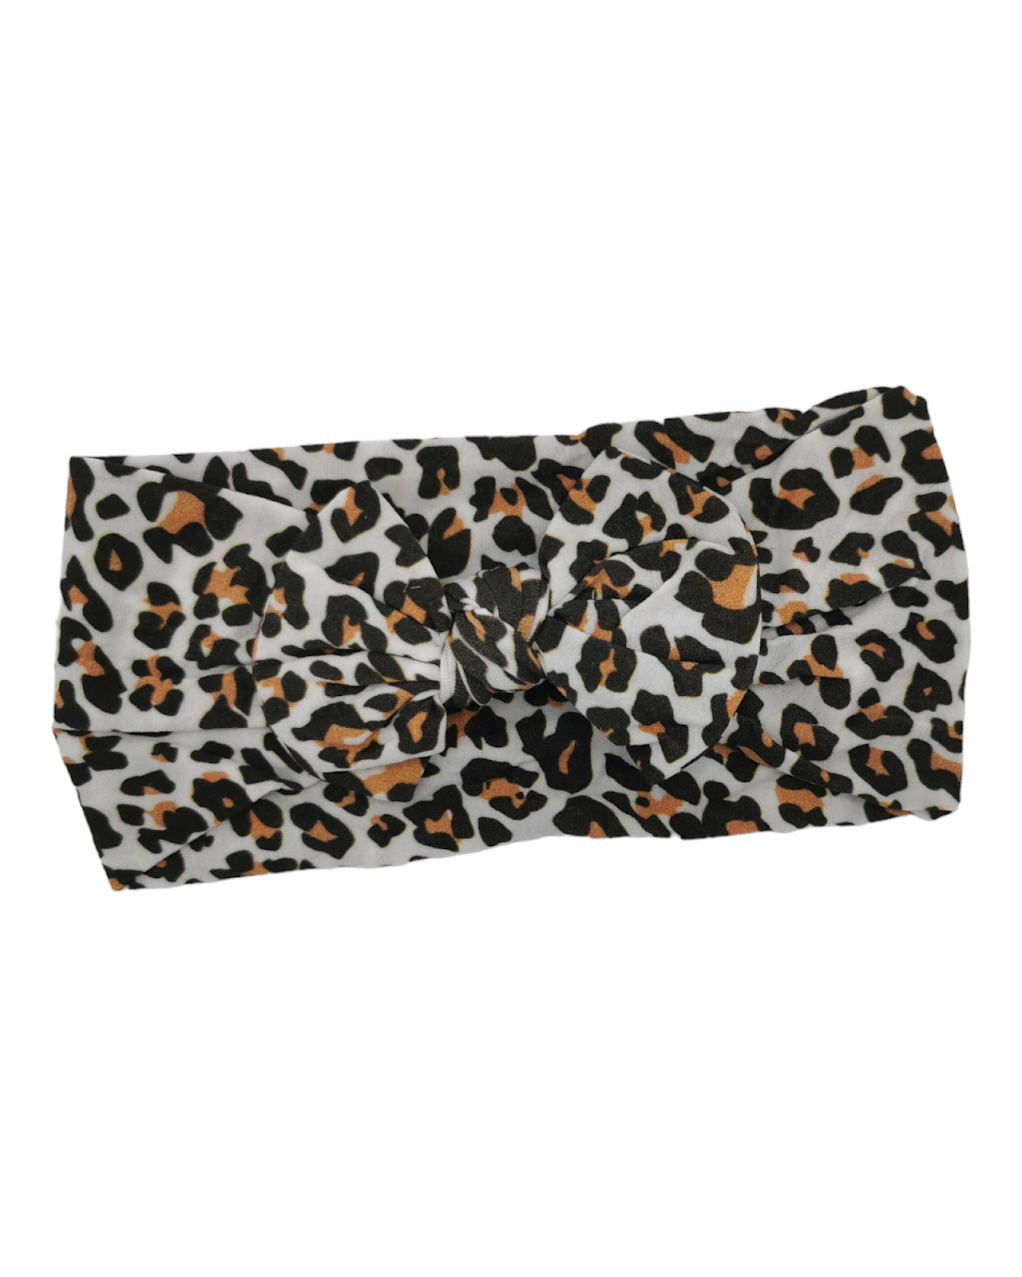 Adult Size - Leopard Patterned Smooth Headwrap - Betty Brown Boutique Ltd